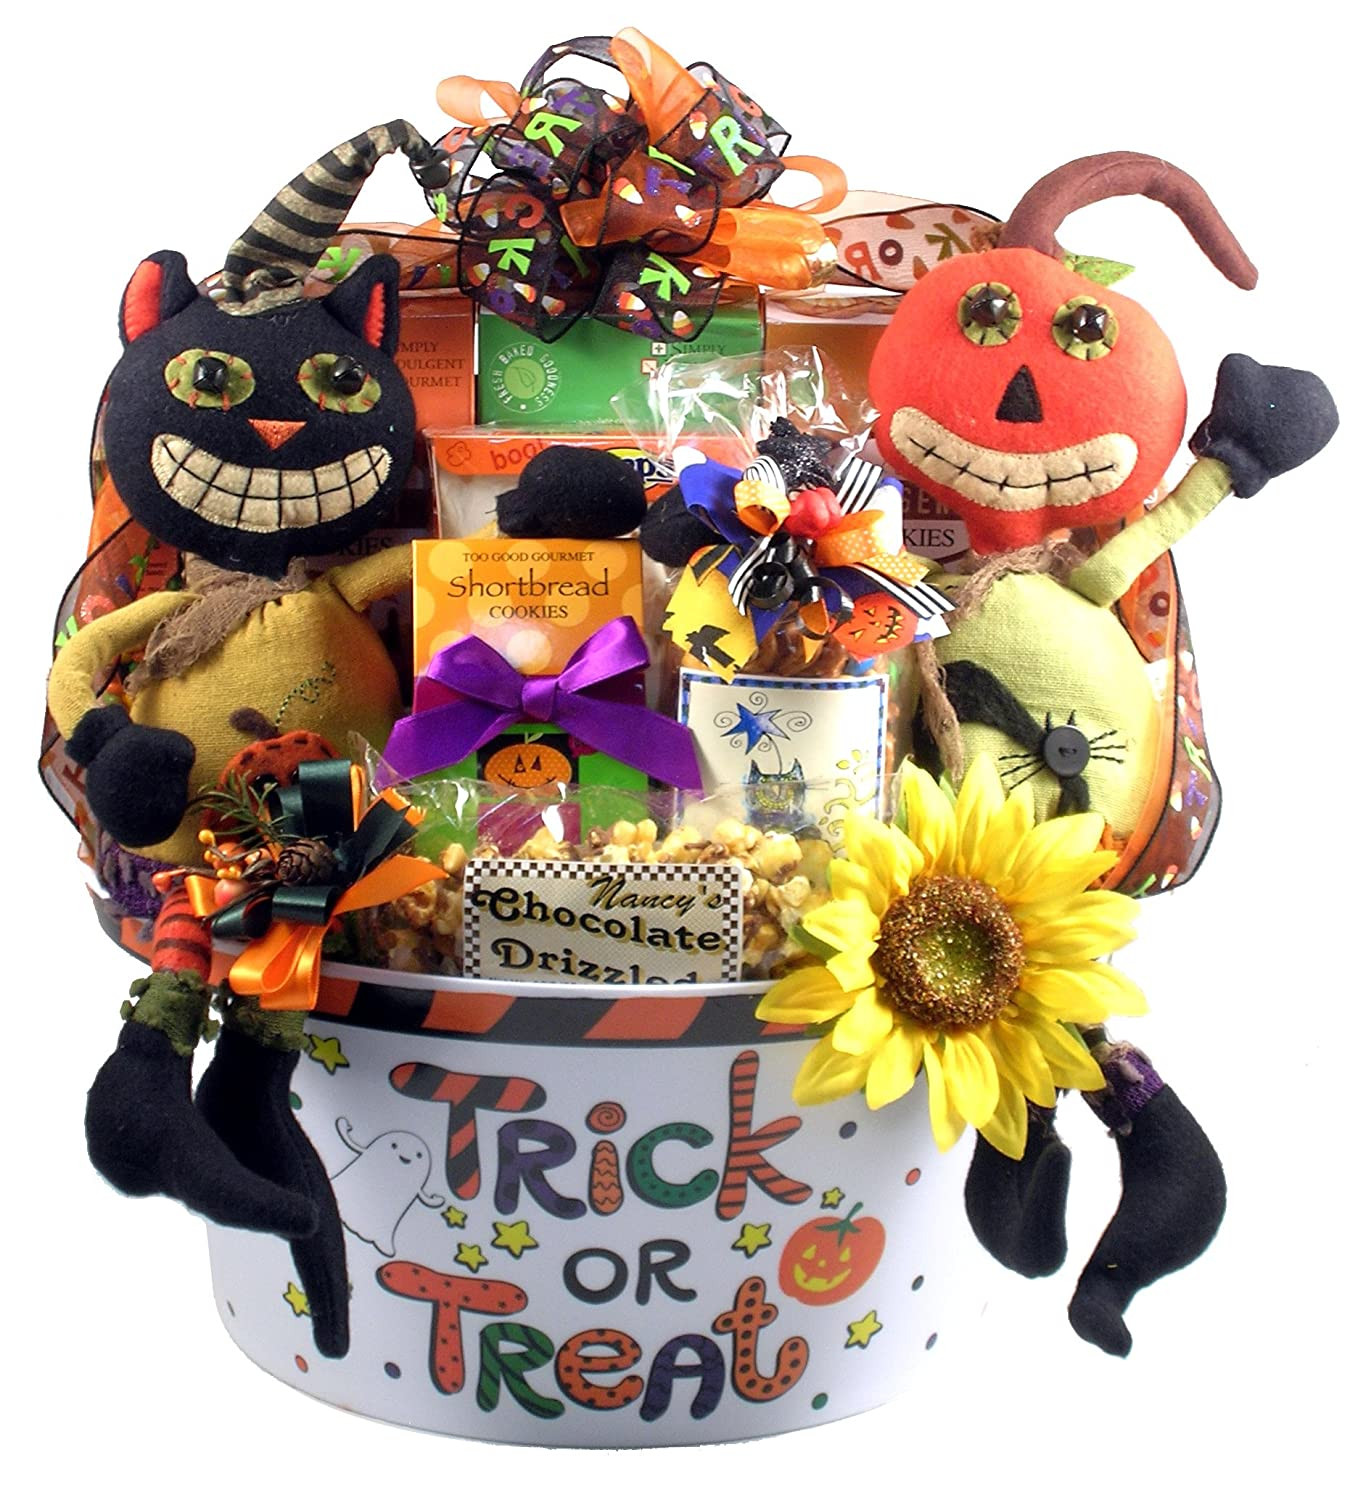 Halloween Party Gift Ideas
 Best Halloween Gift Baskets for Adults and Kids